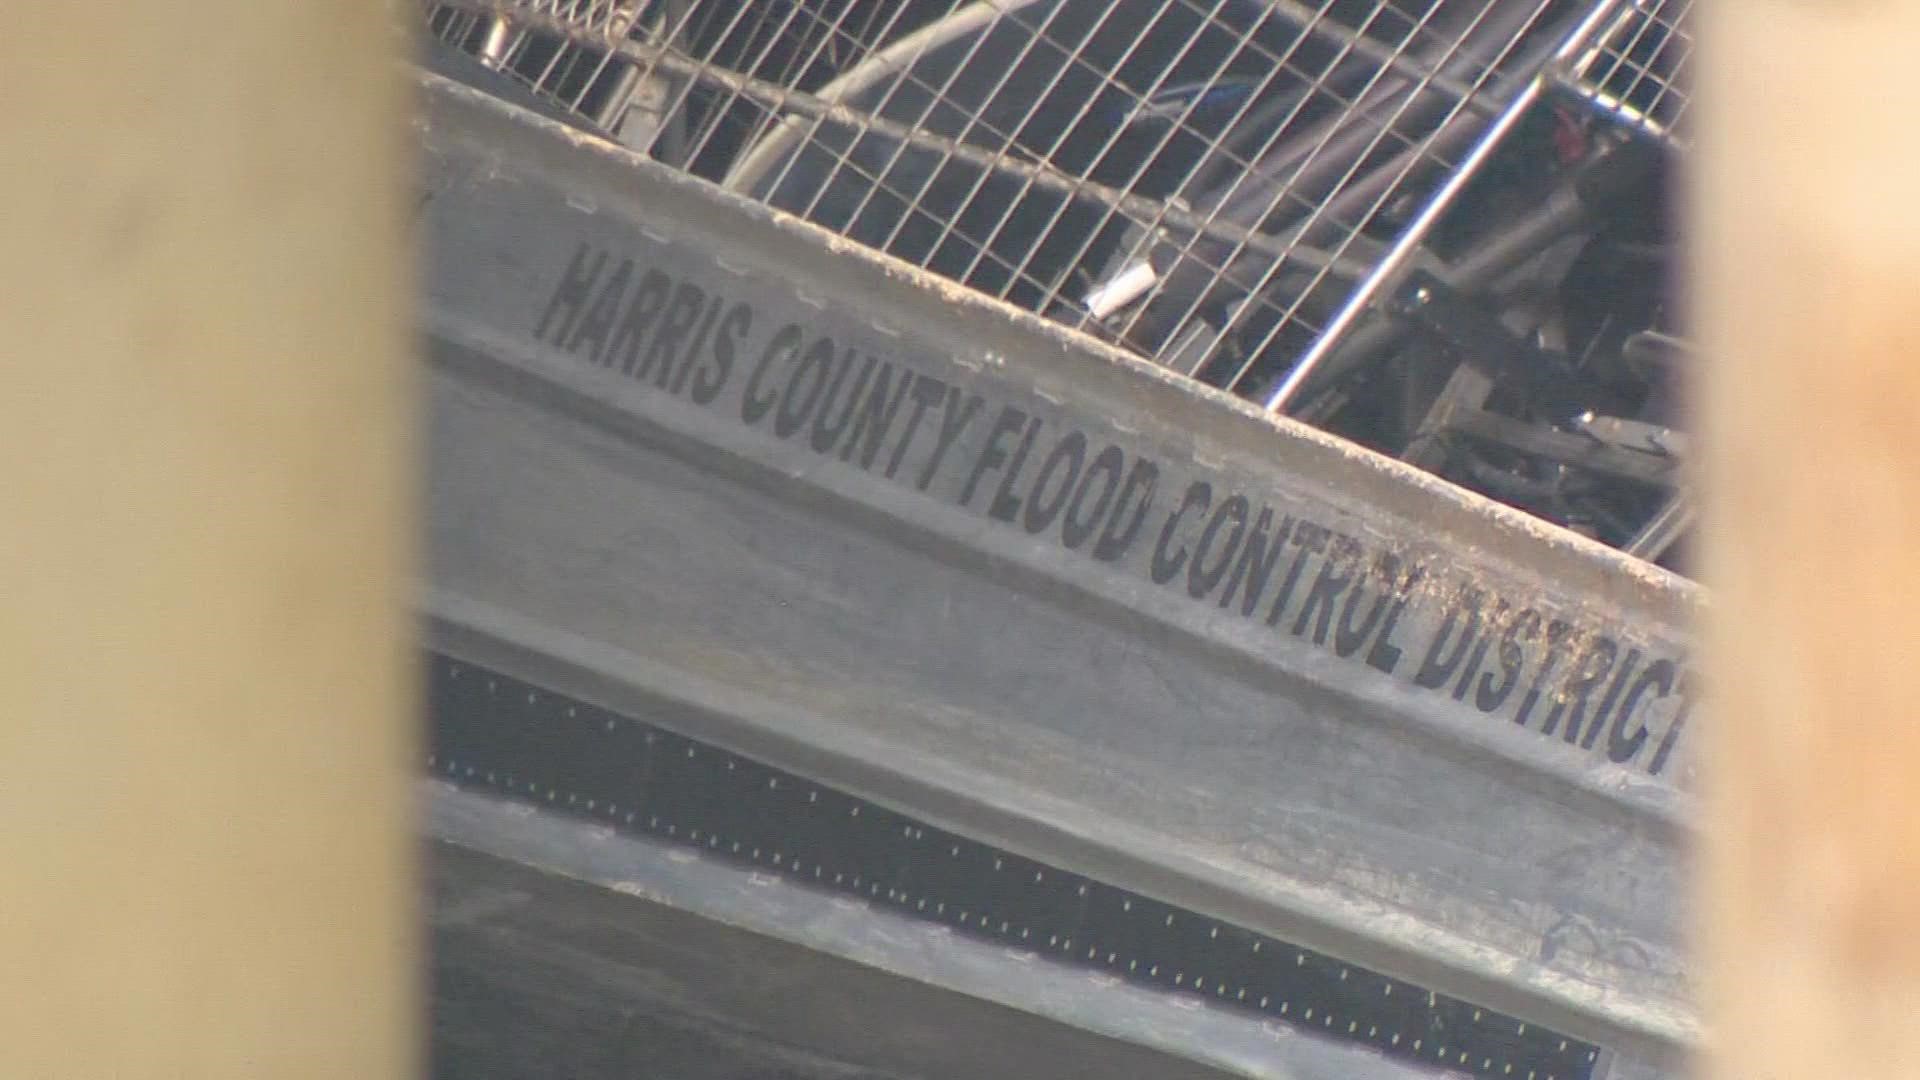 Several Harris County Flood Control District workers were injured Tuesday in a boat crash in west Houston, according to authorities.